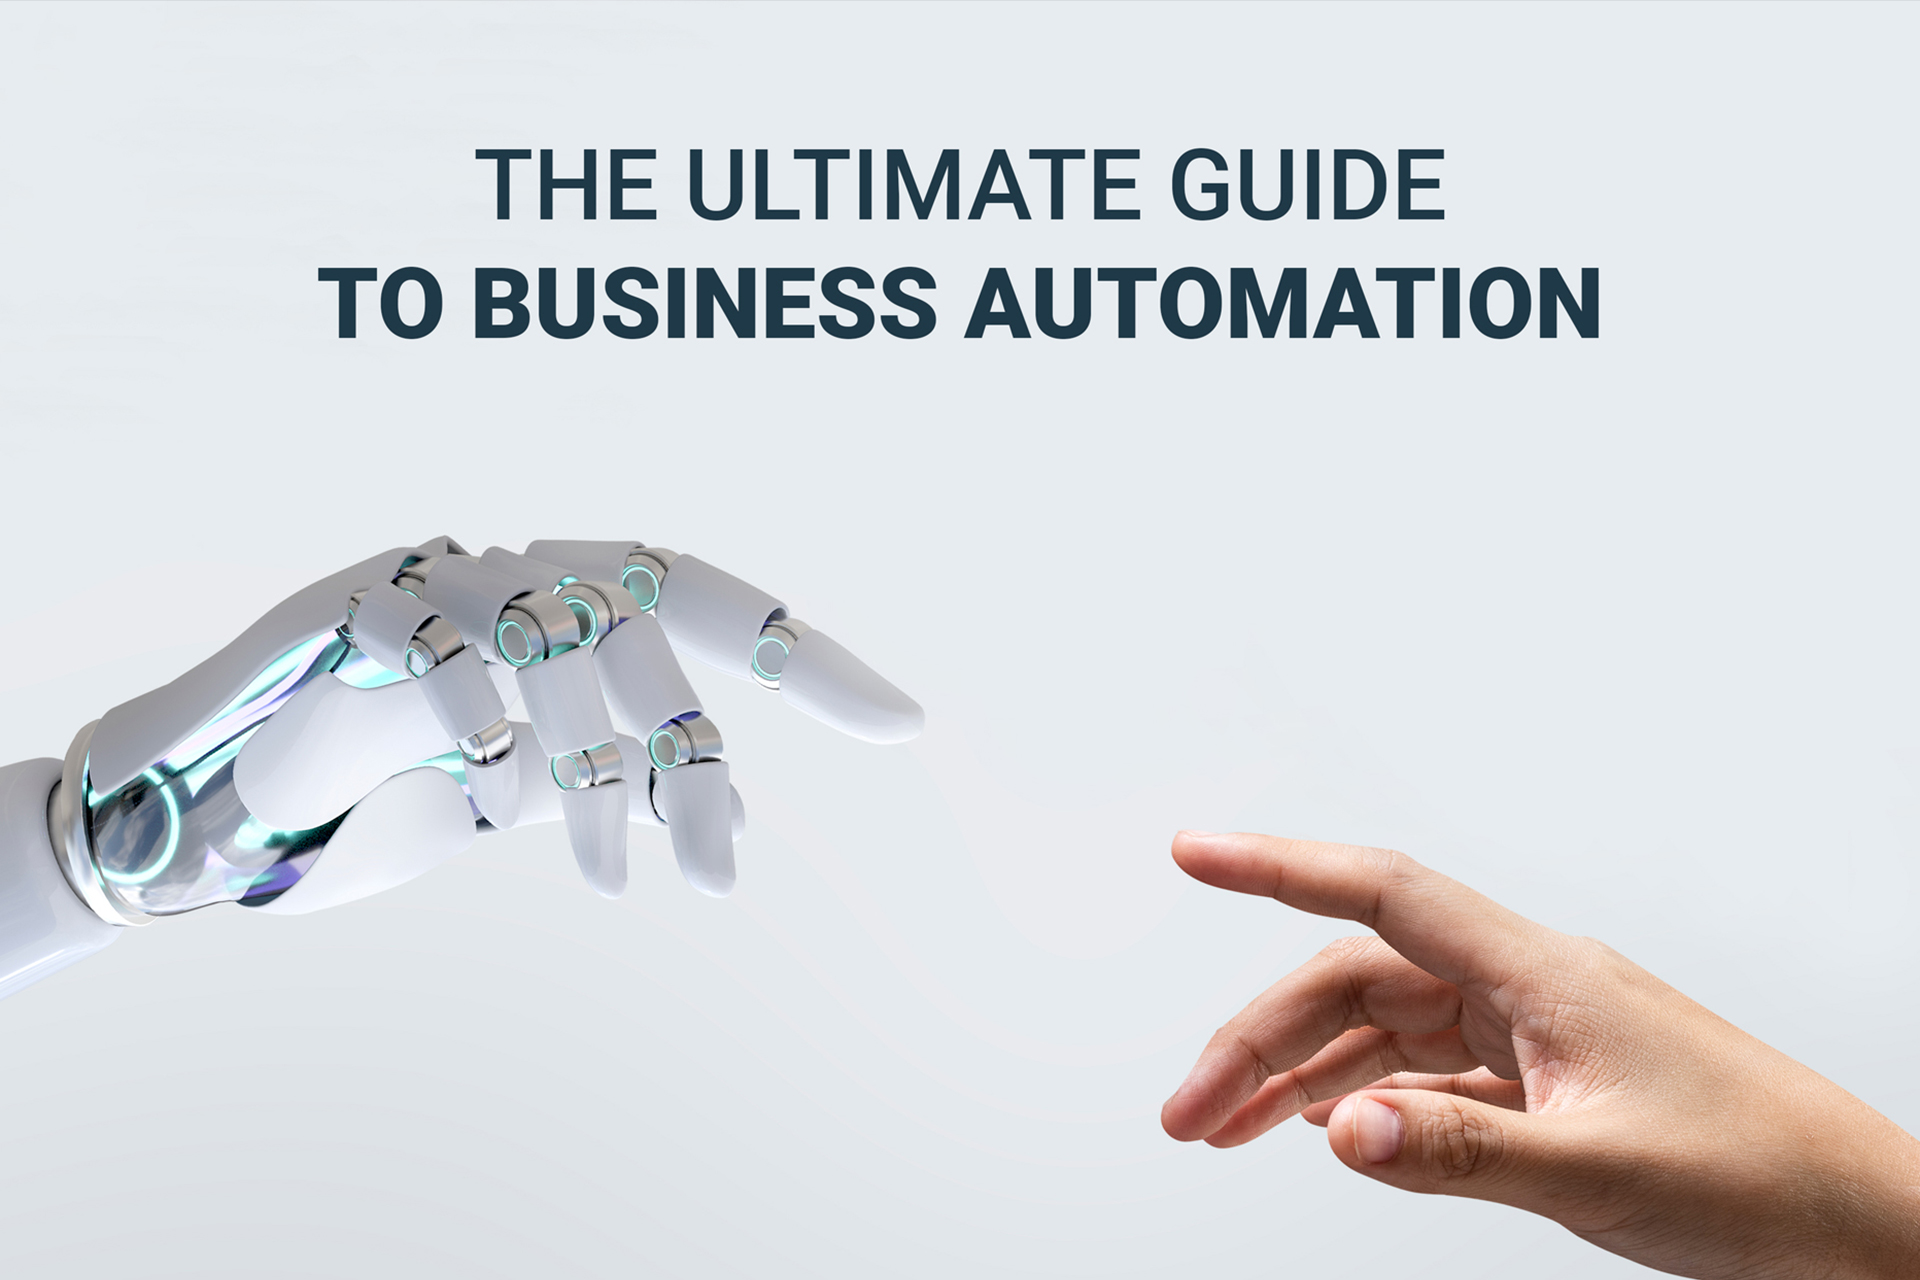 The Ultimate Guide to Business Automation: What is It, Why is it Important, How Does it Work?